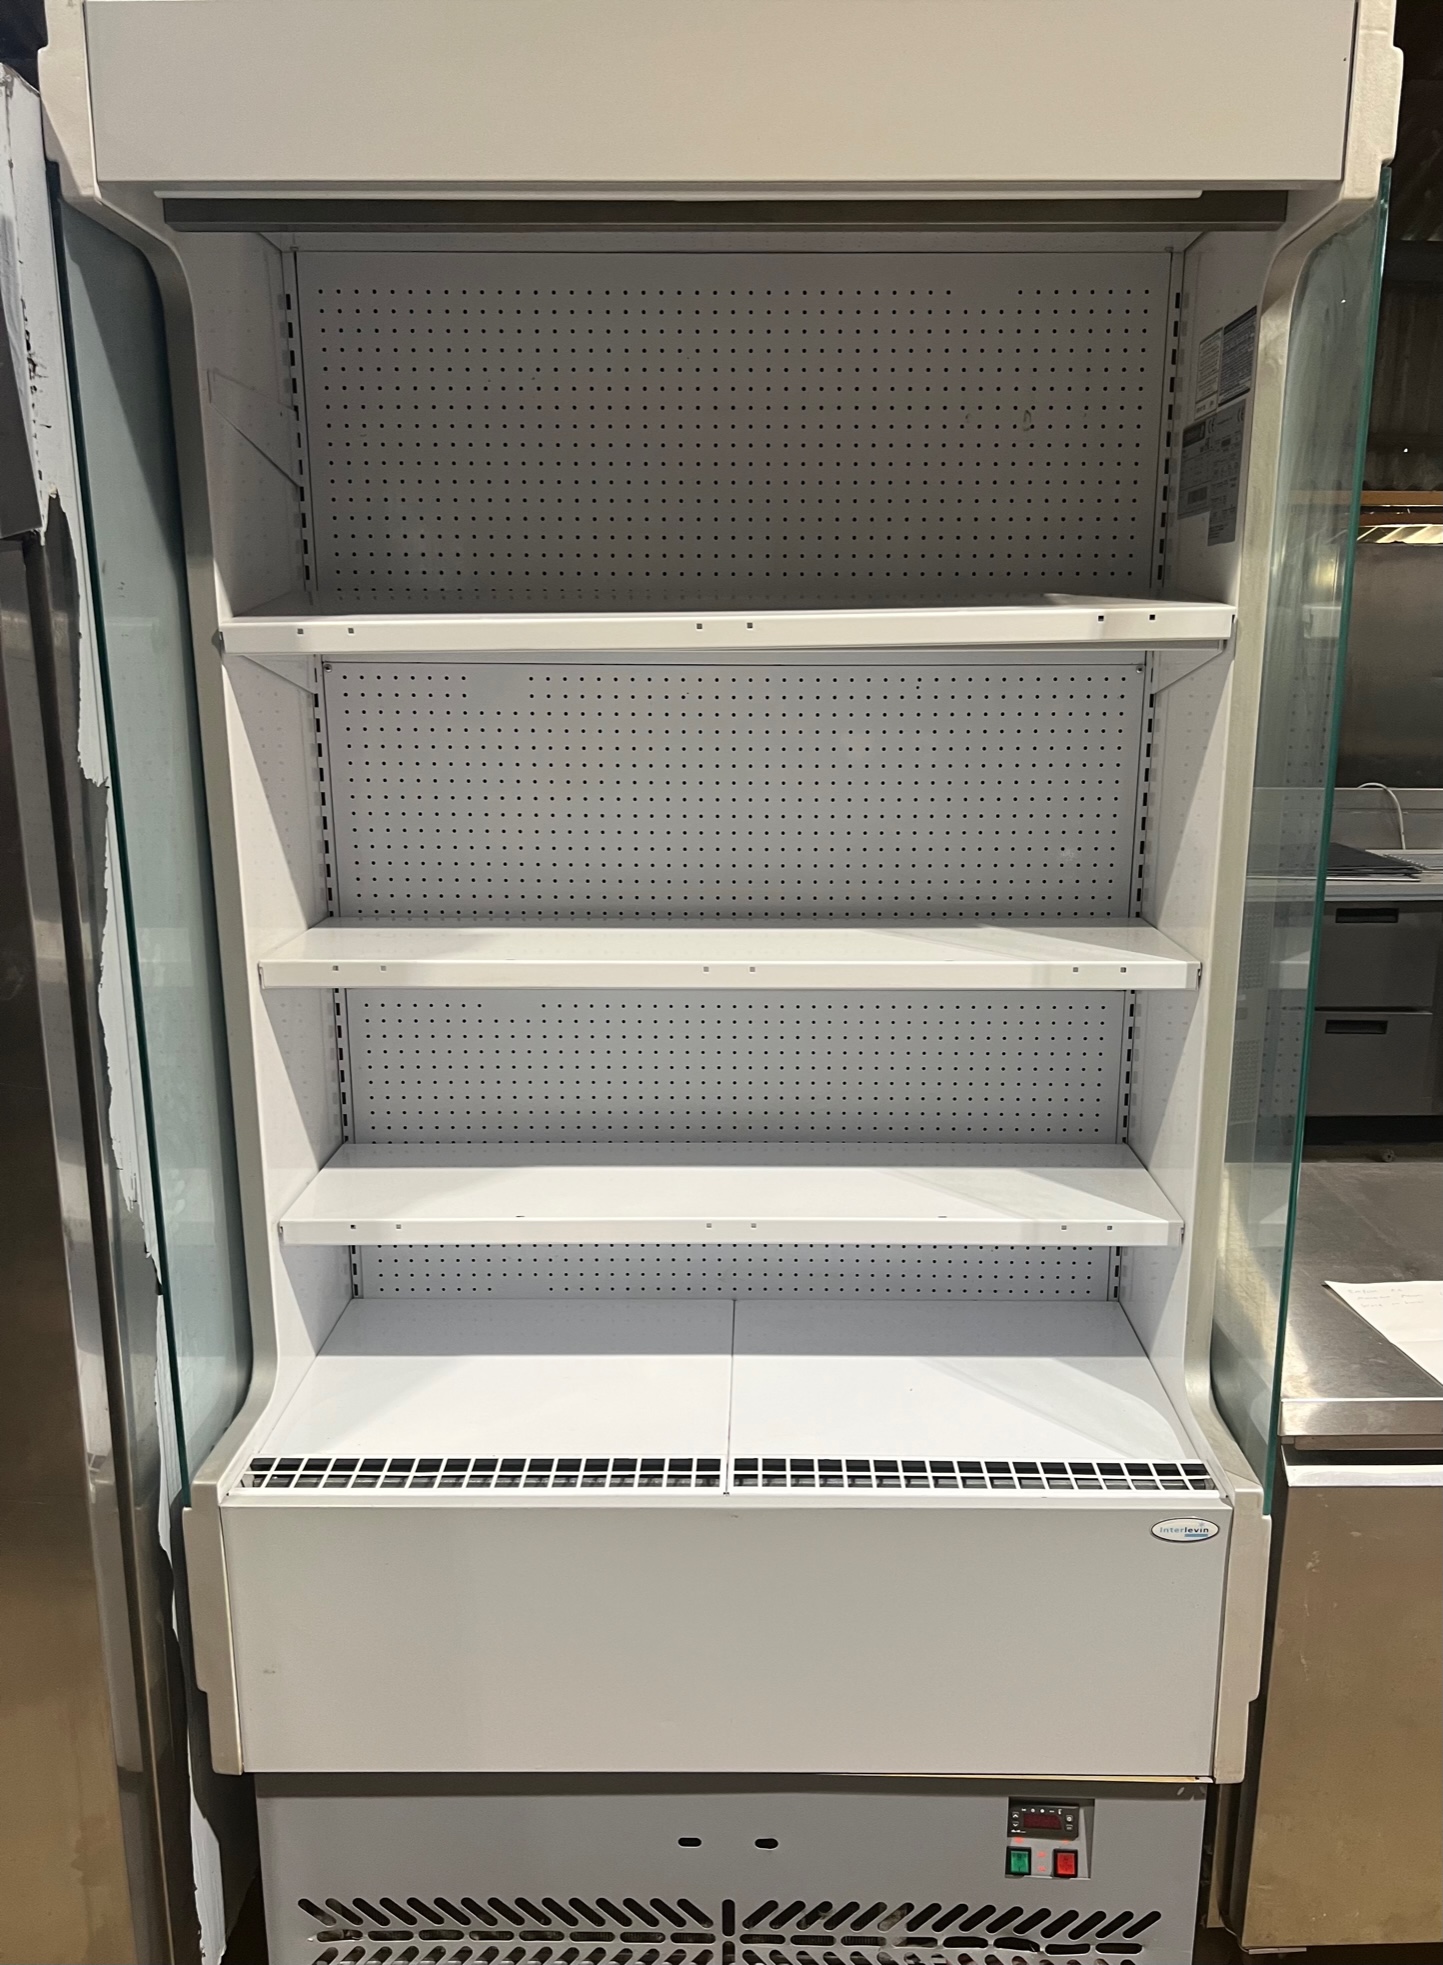 MONDIAL Chilled Multideck Reach-In Display – Immaculate condition